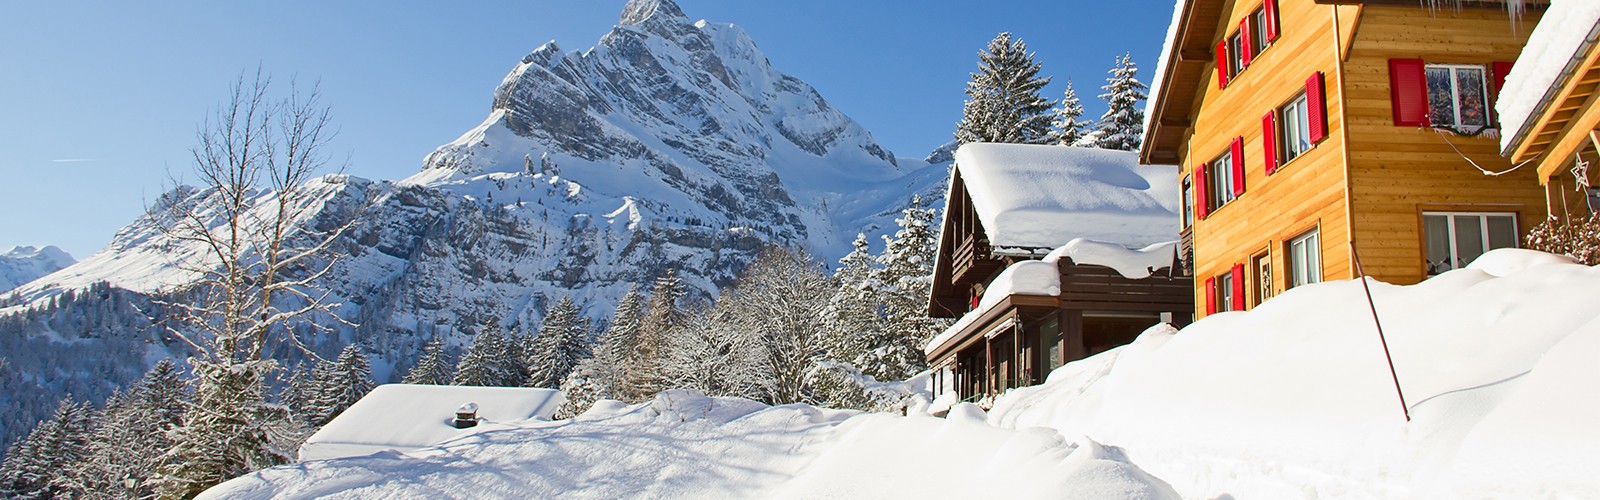 why-have-a-ski-holiday-luxury-ski-holiday-packages